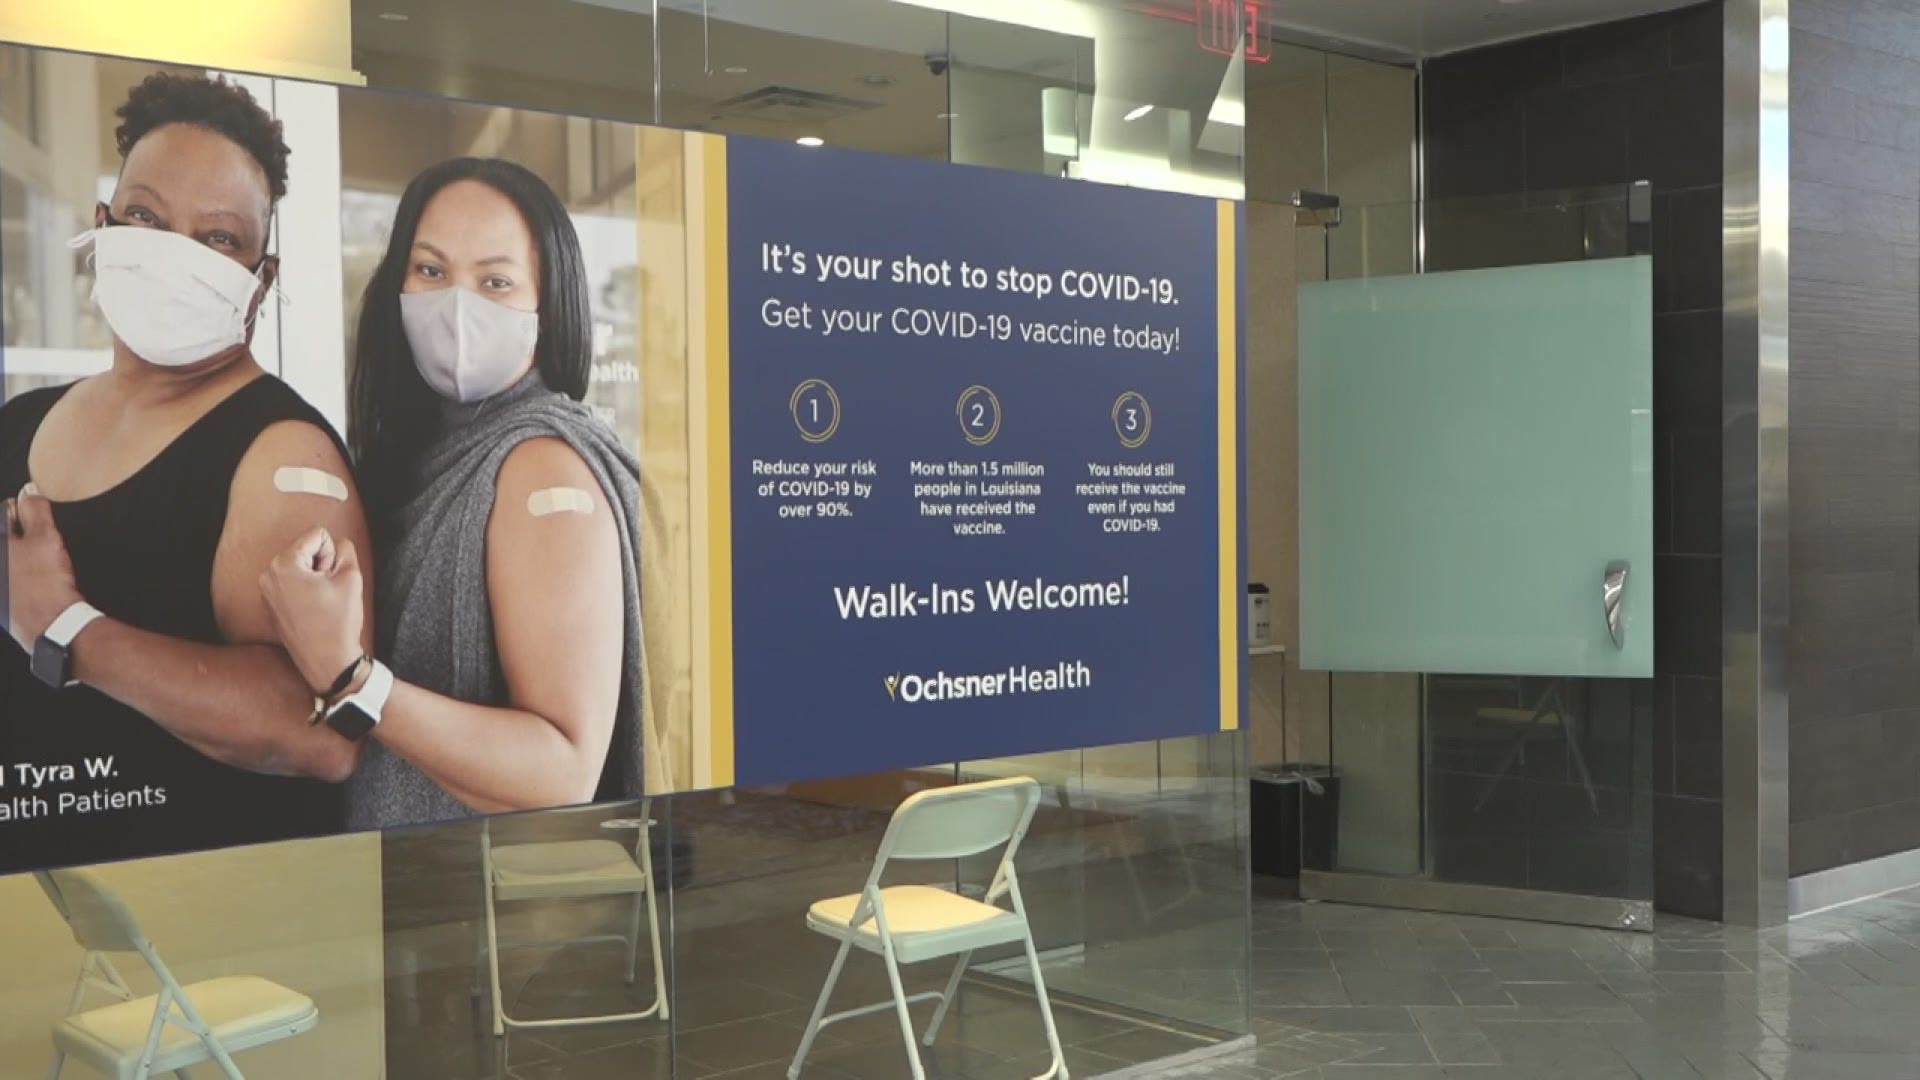 Shoppers were able to get vaccinated at Lakeside Mall this week after Ochsner set up a vaccination site right in the mall.